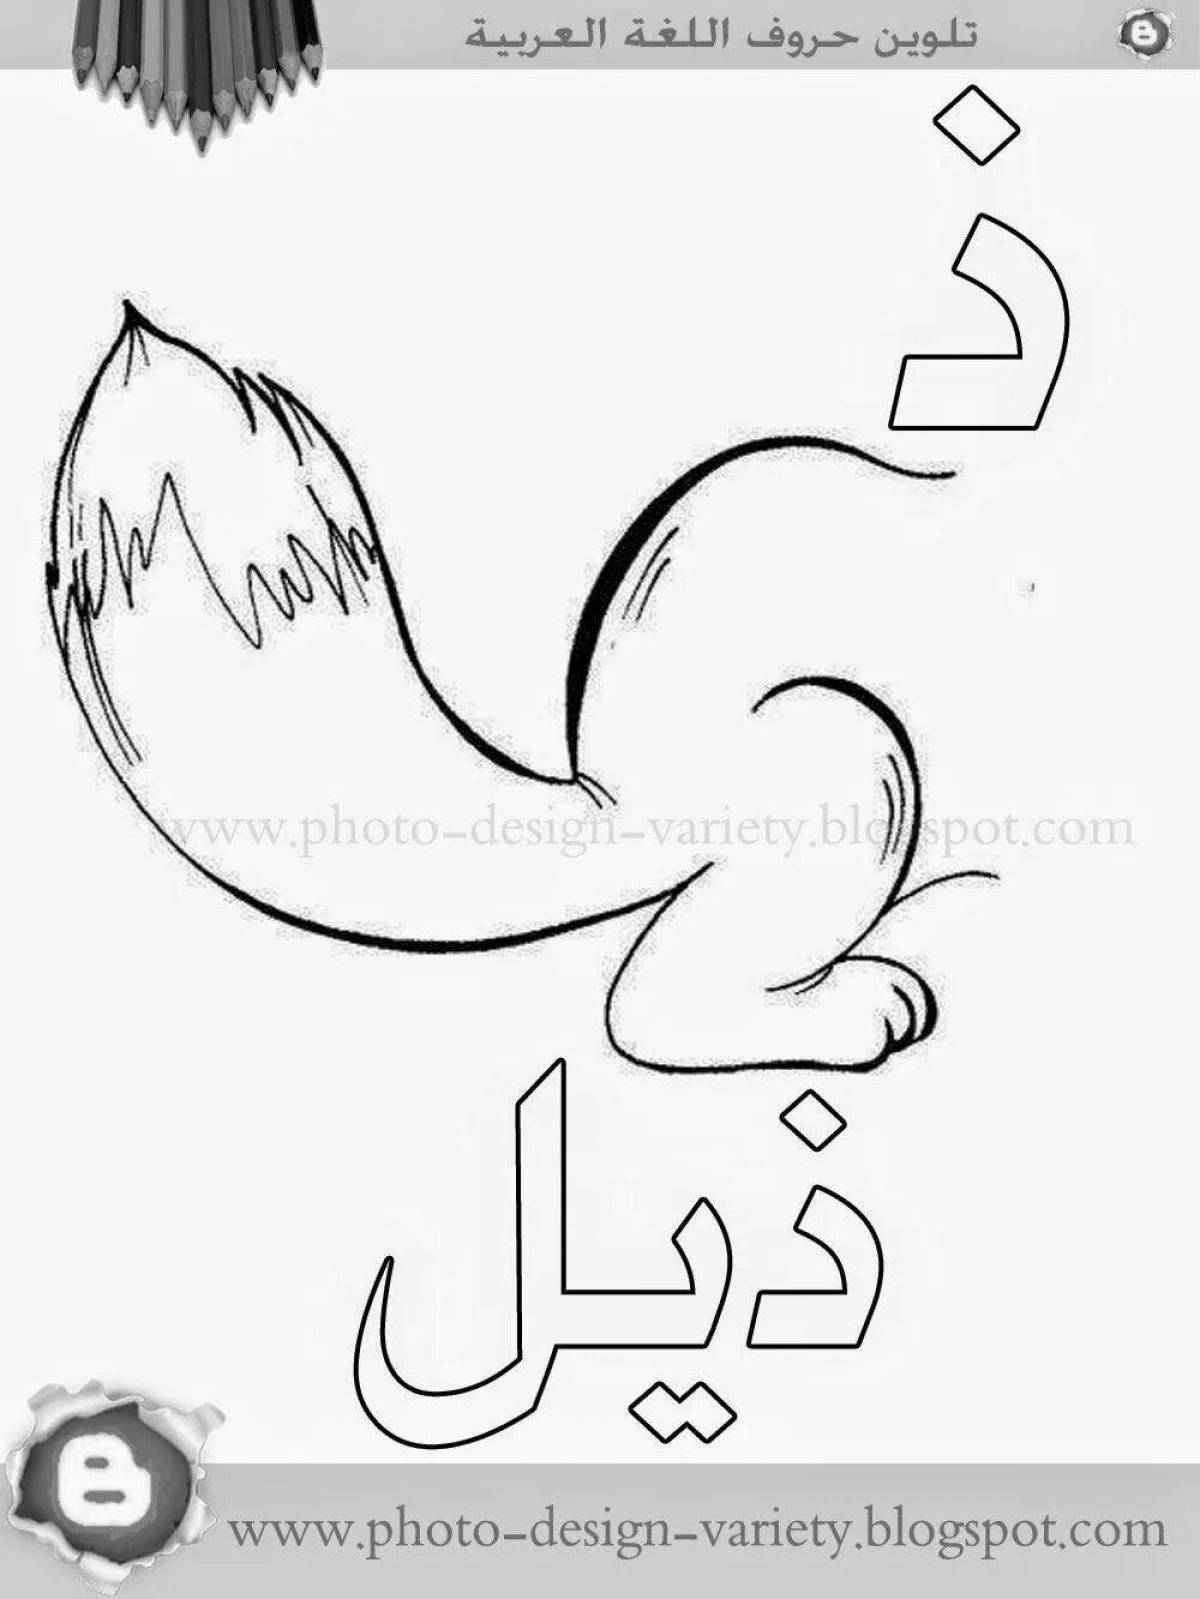 Colorful Arabic alphabet coloring page for kids of all ages